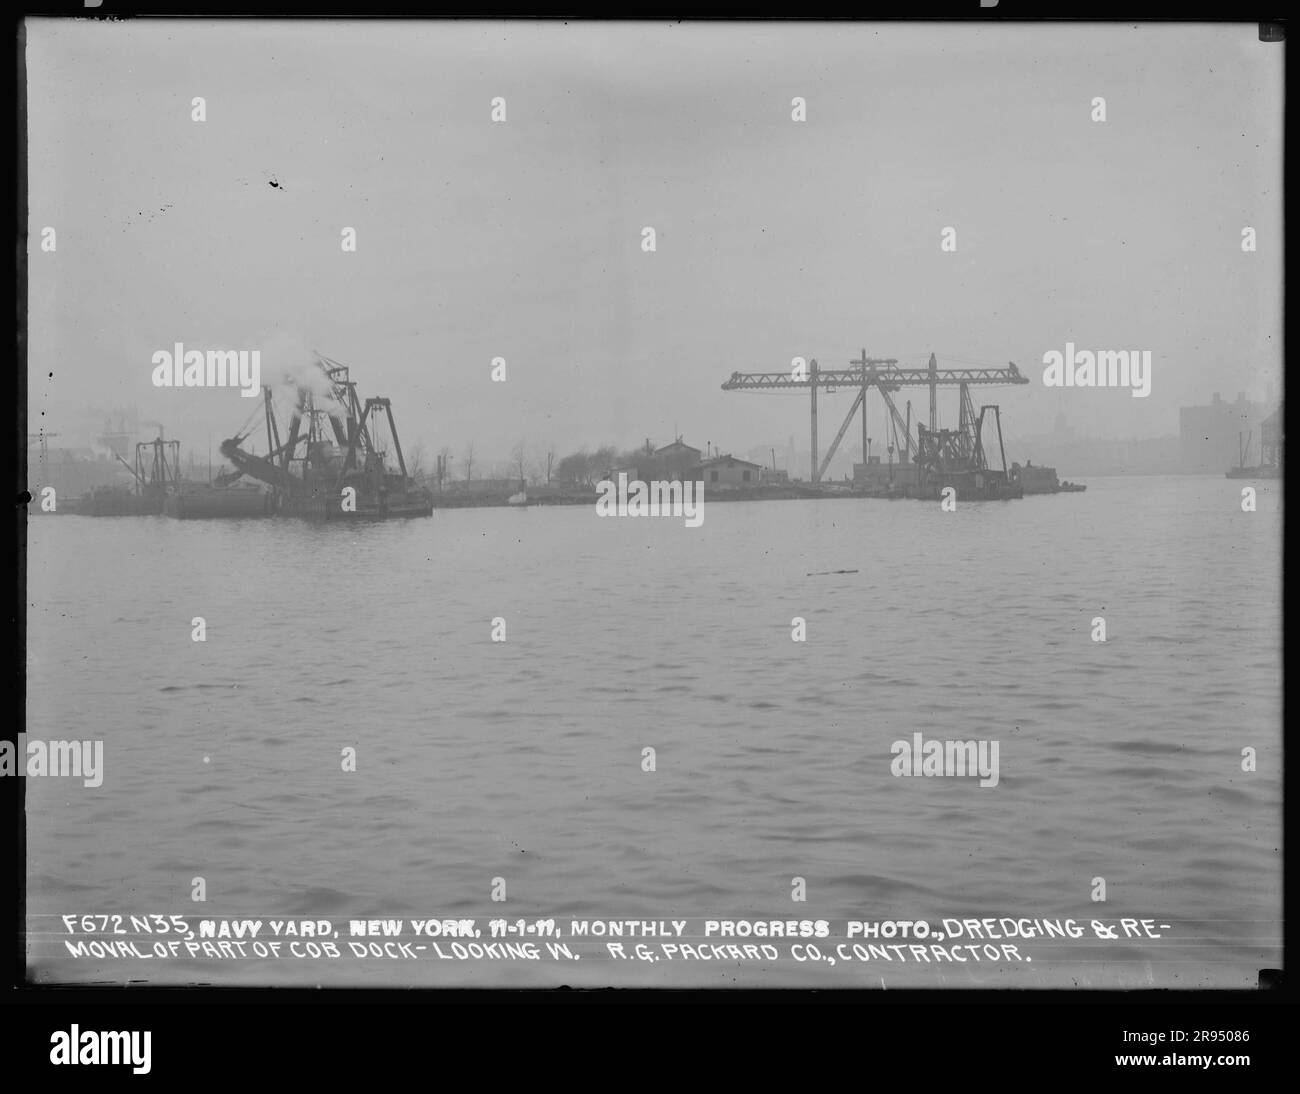 Monthly Progress Photo, Dredging and Removal of Part of Cob Dock, Looking West, R. G. Packard Company, Contractor. Glass Plate Negatives of the Construction and Repair of Buildings, Facilities, and Vessels at the New York Navy Yard. Stock Photo